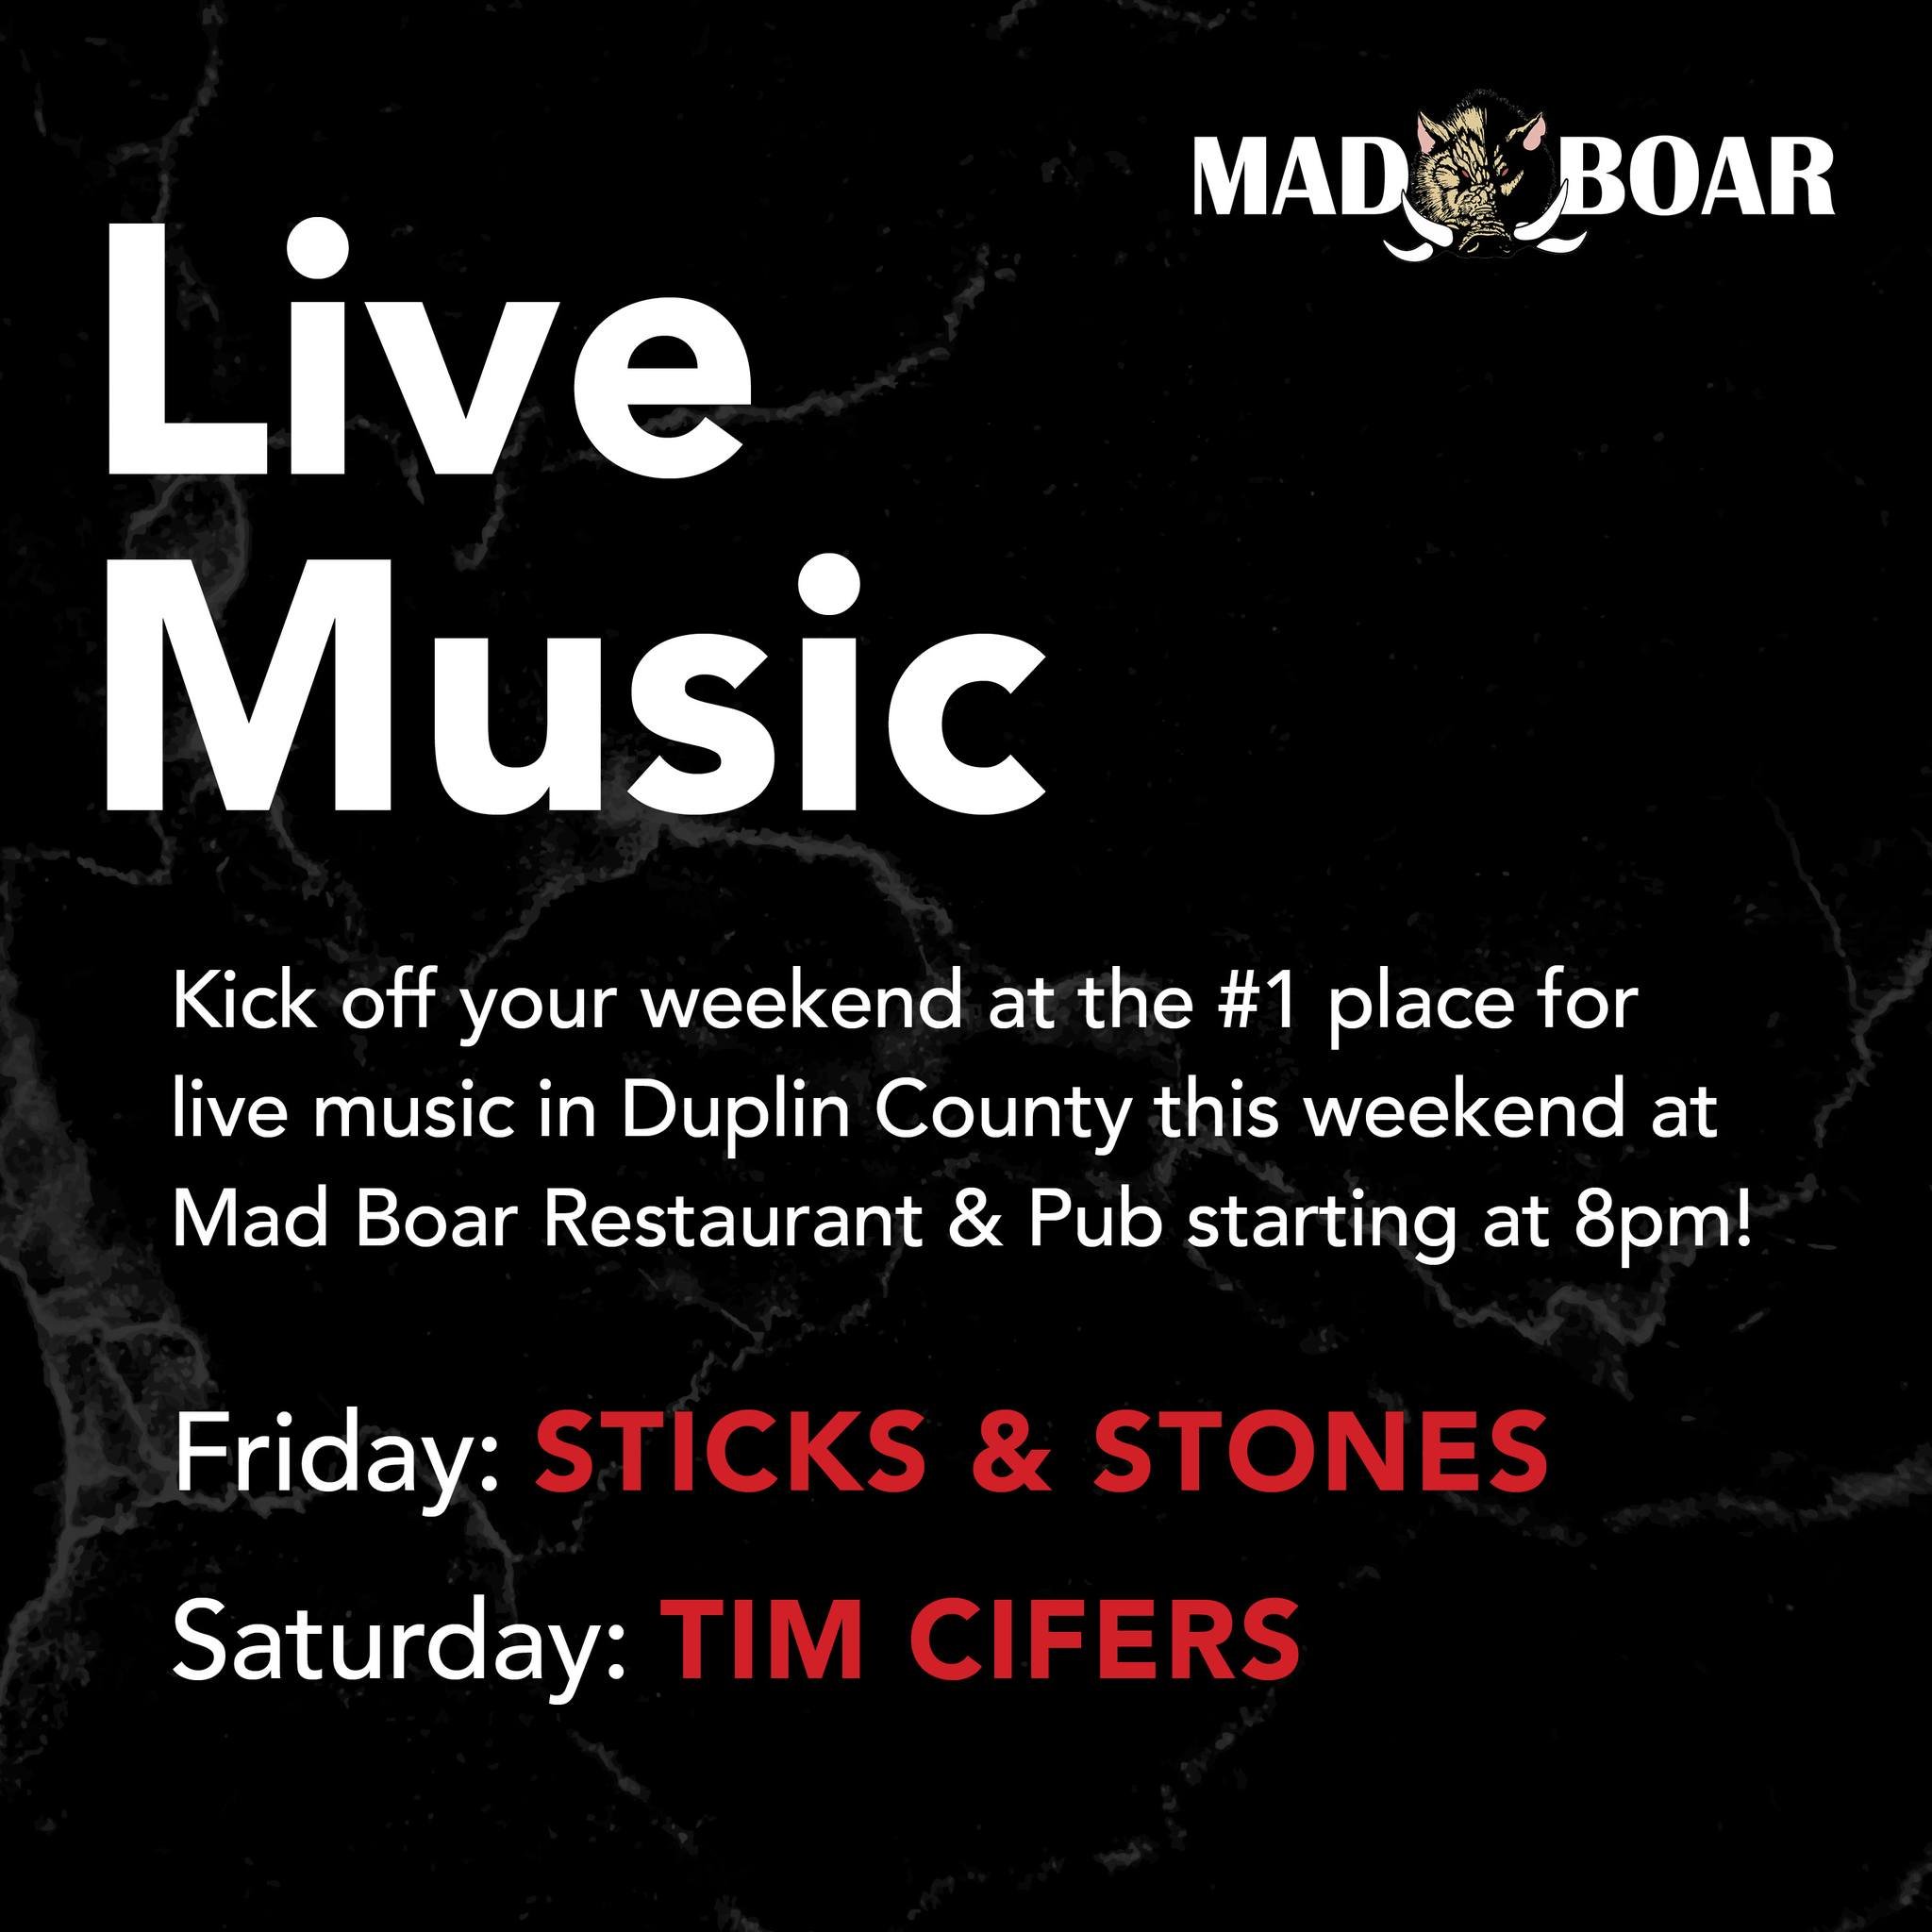 Get ready to dance, sing, and enjoy delicious food this weekend at Mad Boar! Sticks &amp; Stones and Tim Cifers are bringing the heat with live performances you won't want to miss. See you there!

#livemusic #supportlocalmusic #localband #madboarnc #